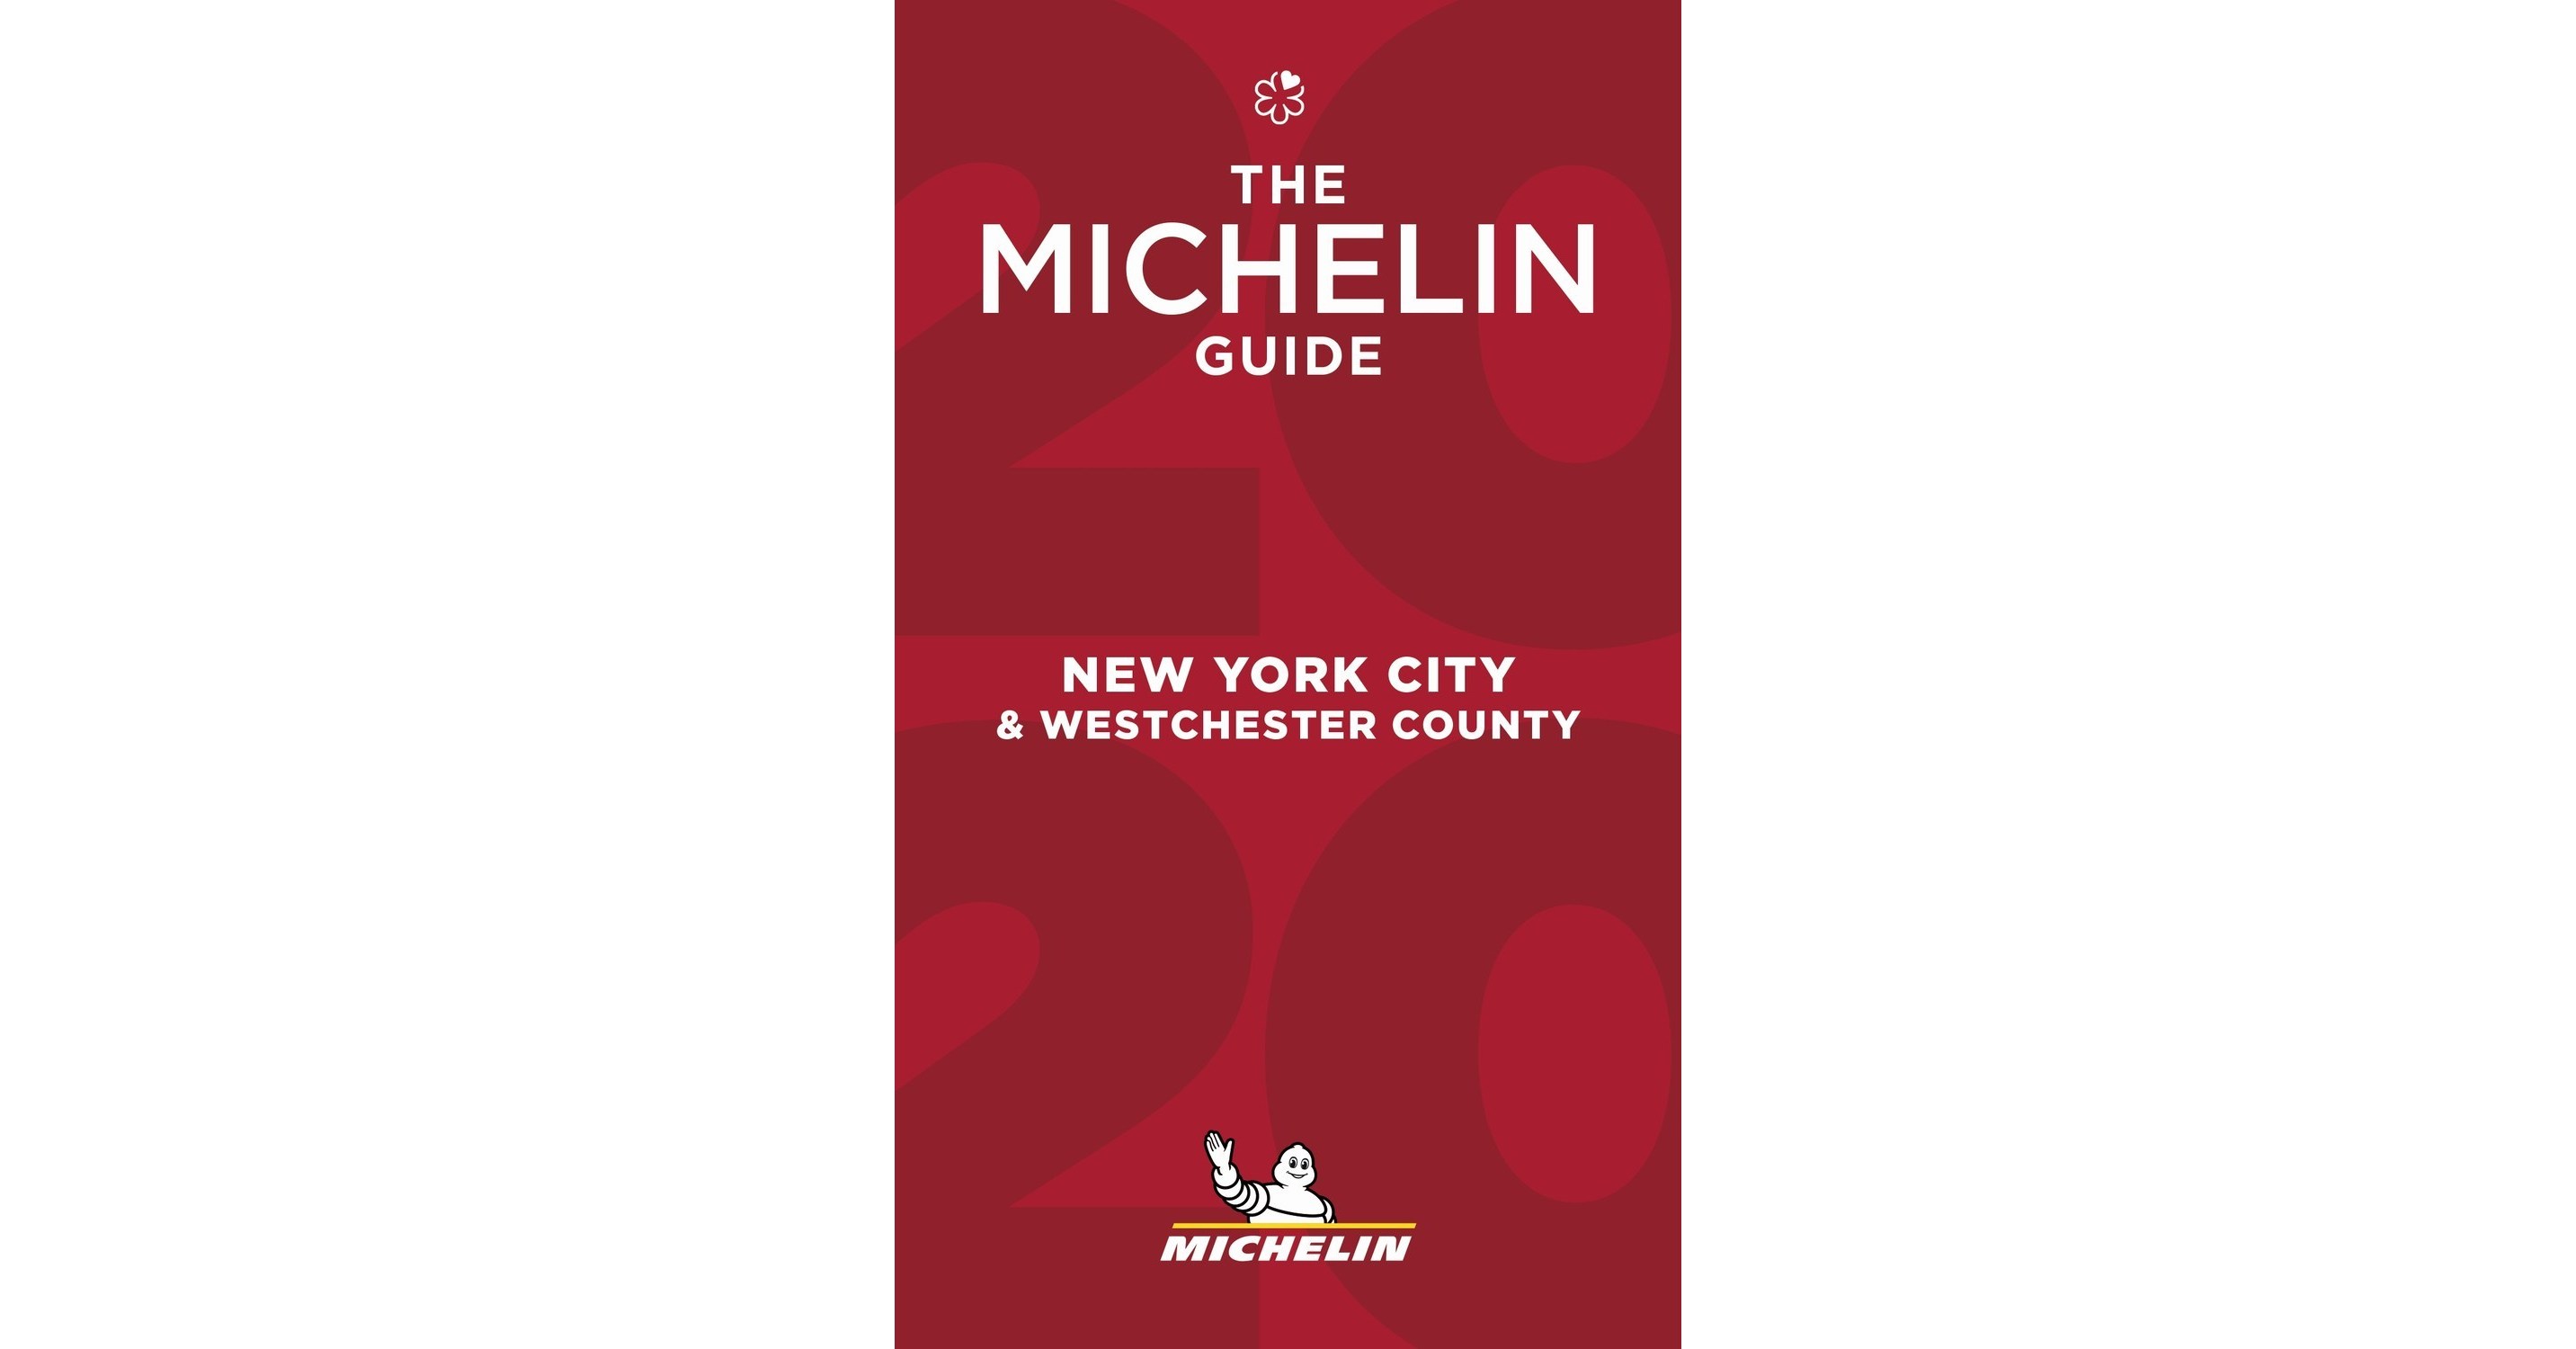 MICHELIN Guide Celebrates 15 Years In New York City With Expansion To